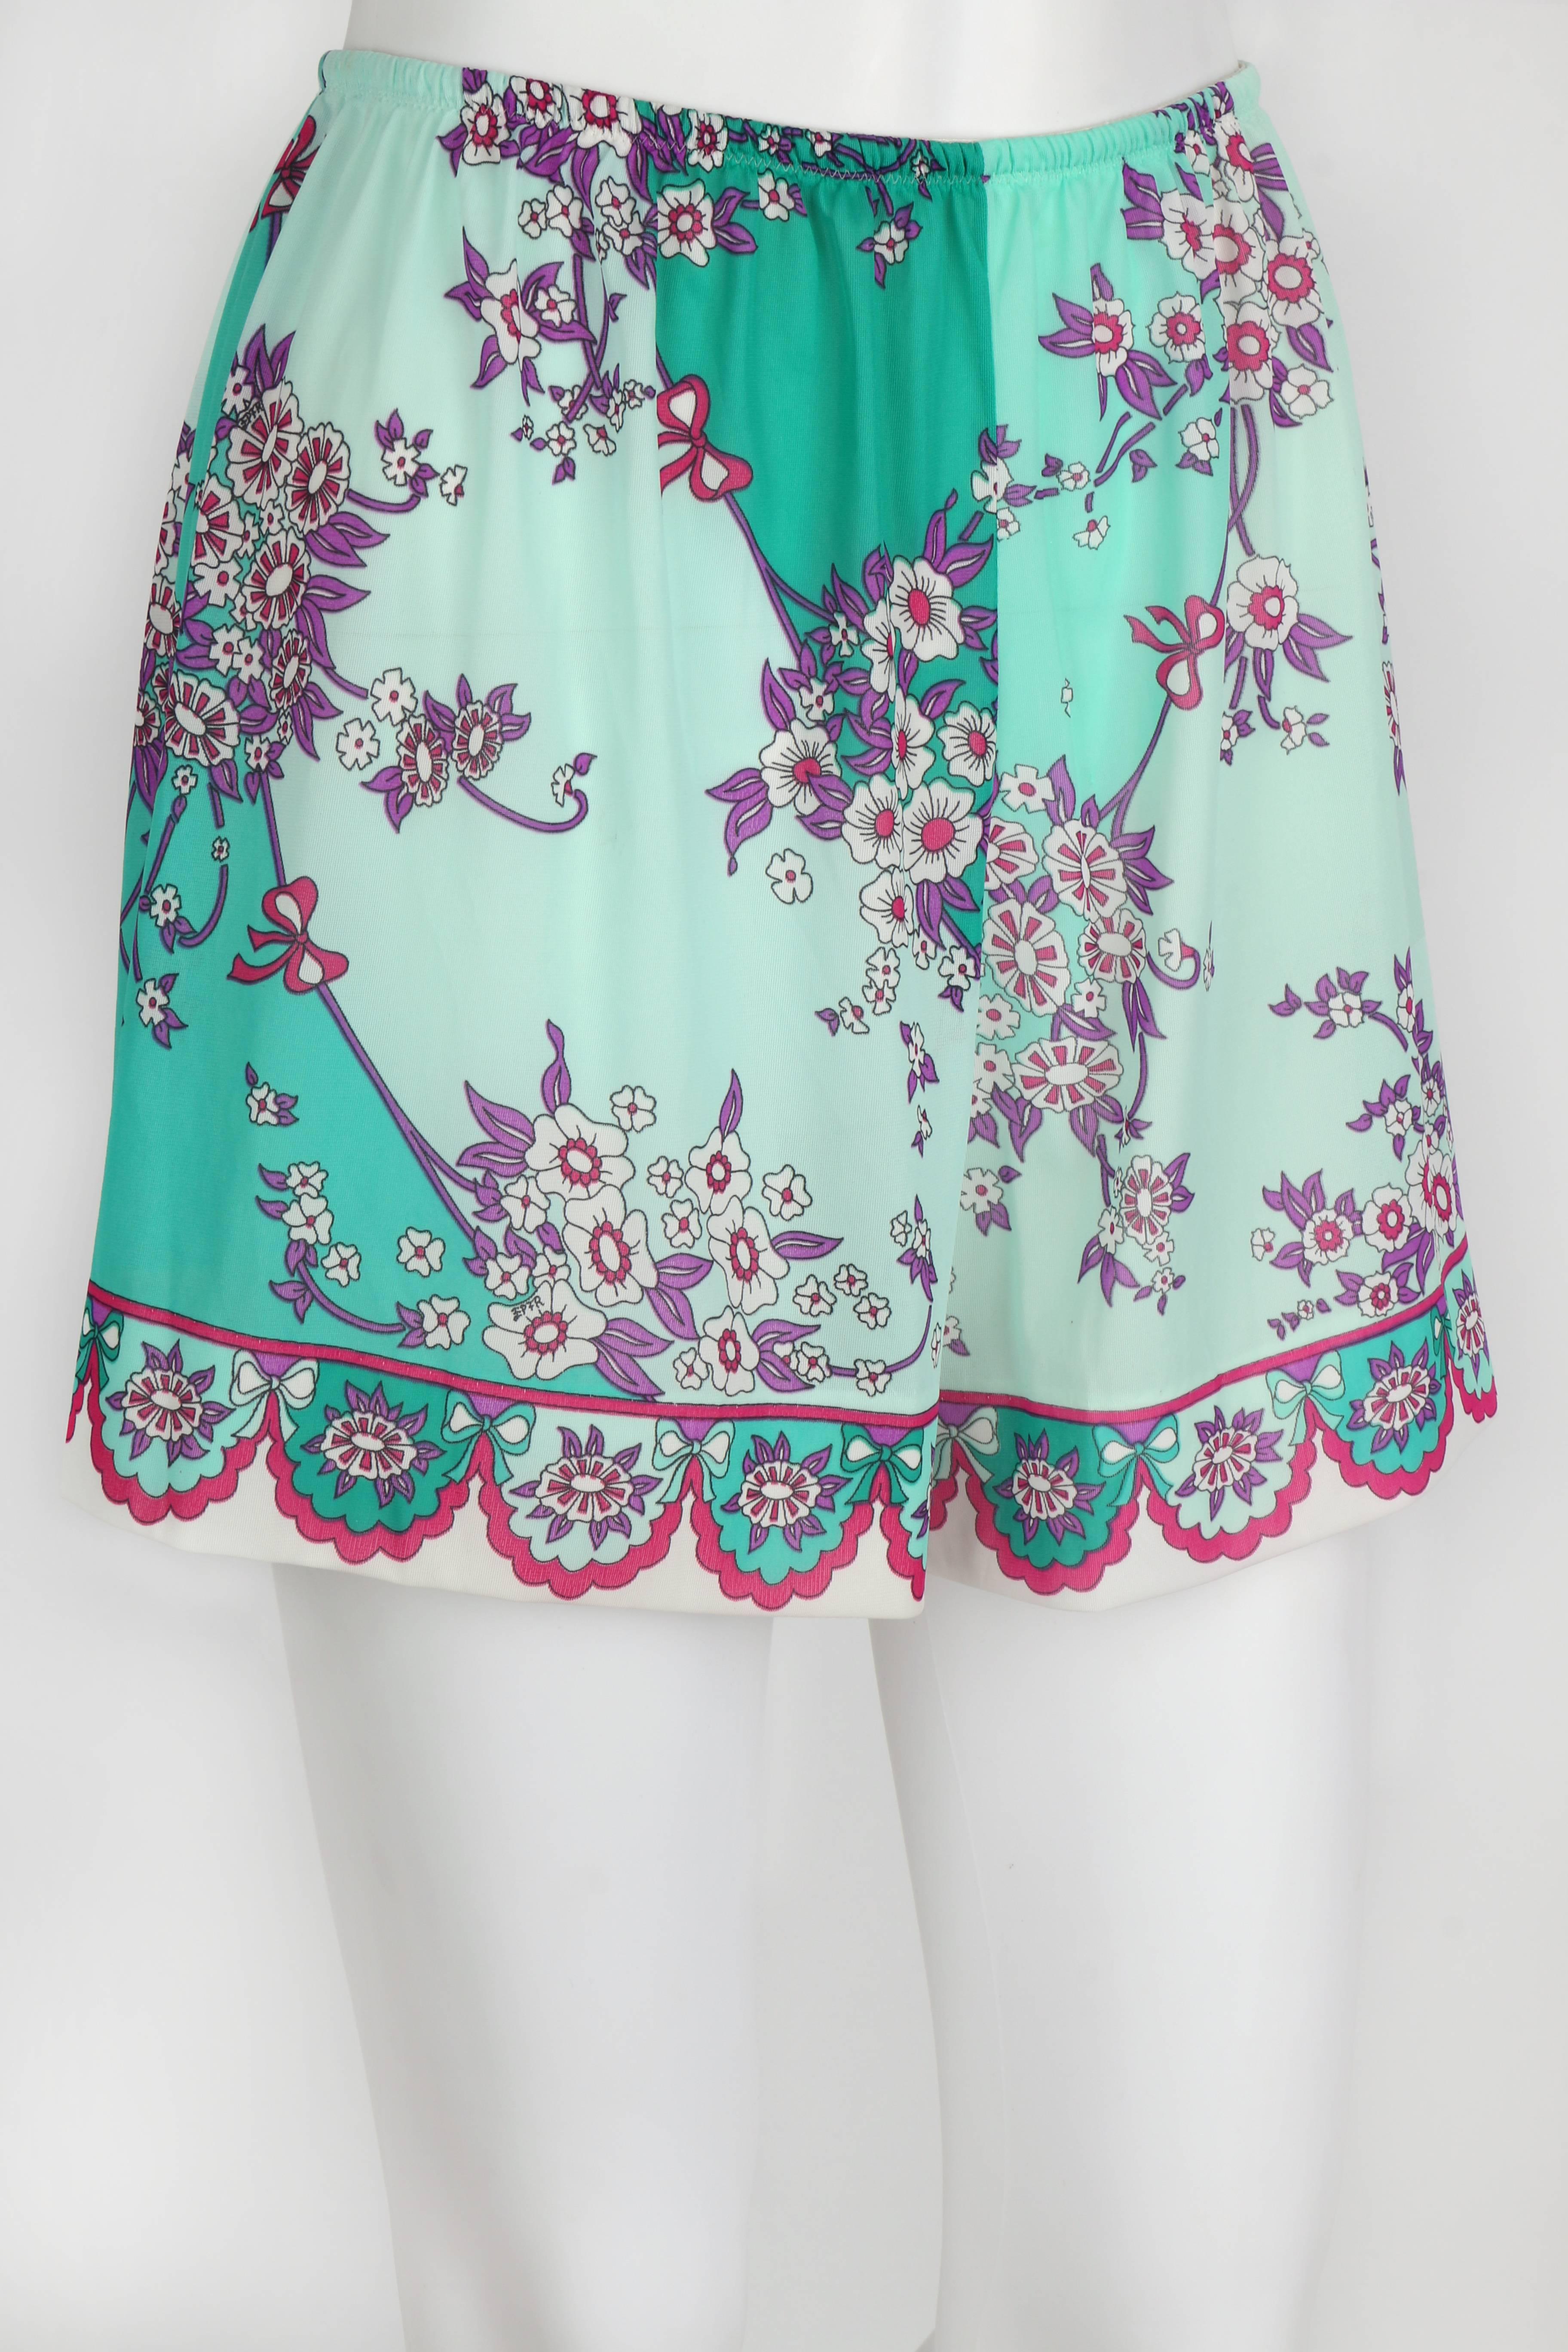 Vintage c.1960's Emilio Pucci for Formfit Rogers floral and bow print tap pants/shorts in shades of mint green / teal and aqua. Op art scalloped floral decorative border on hem. High waisted. Elastic waistband. Unmarked Fabric Content: Nylon tricot.